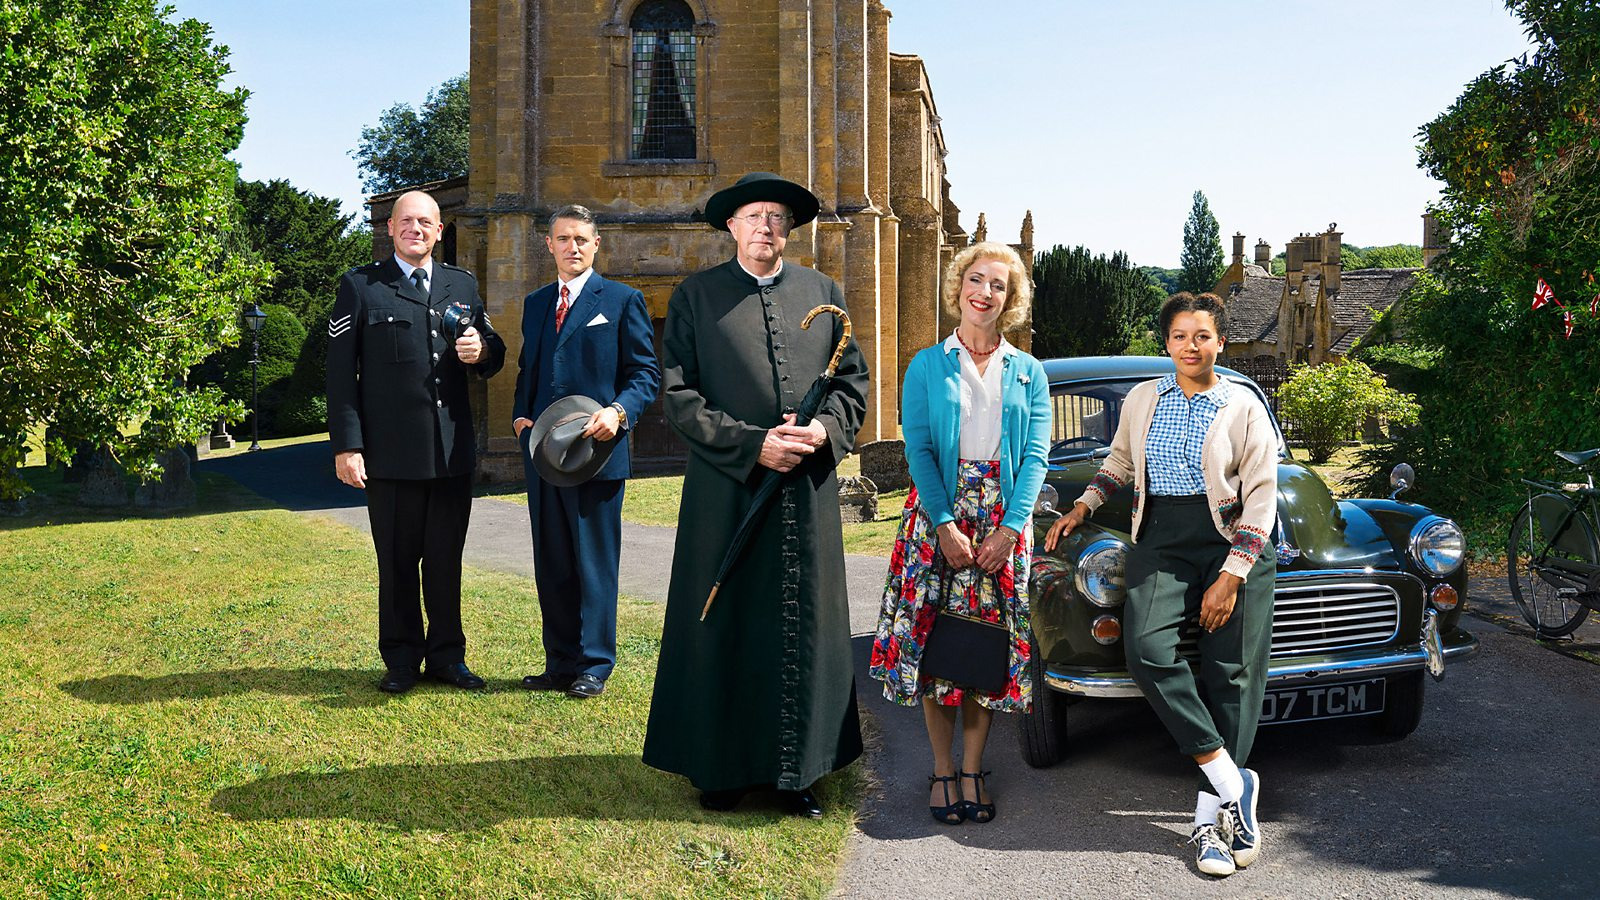 Show Father Brown